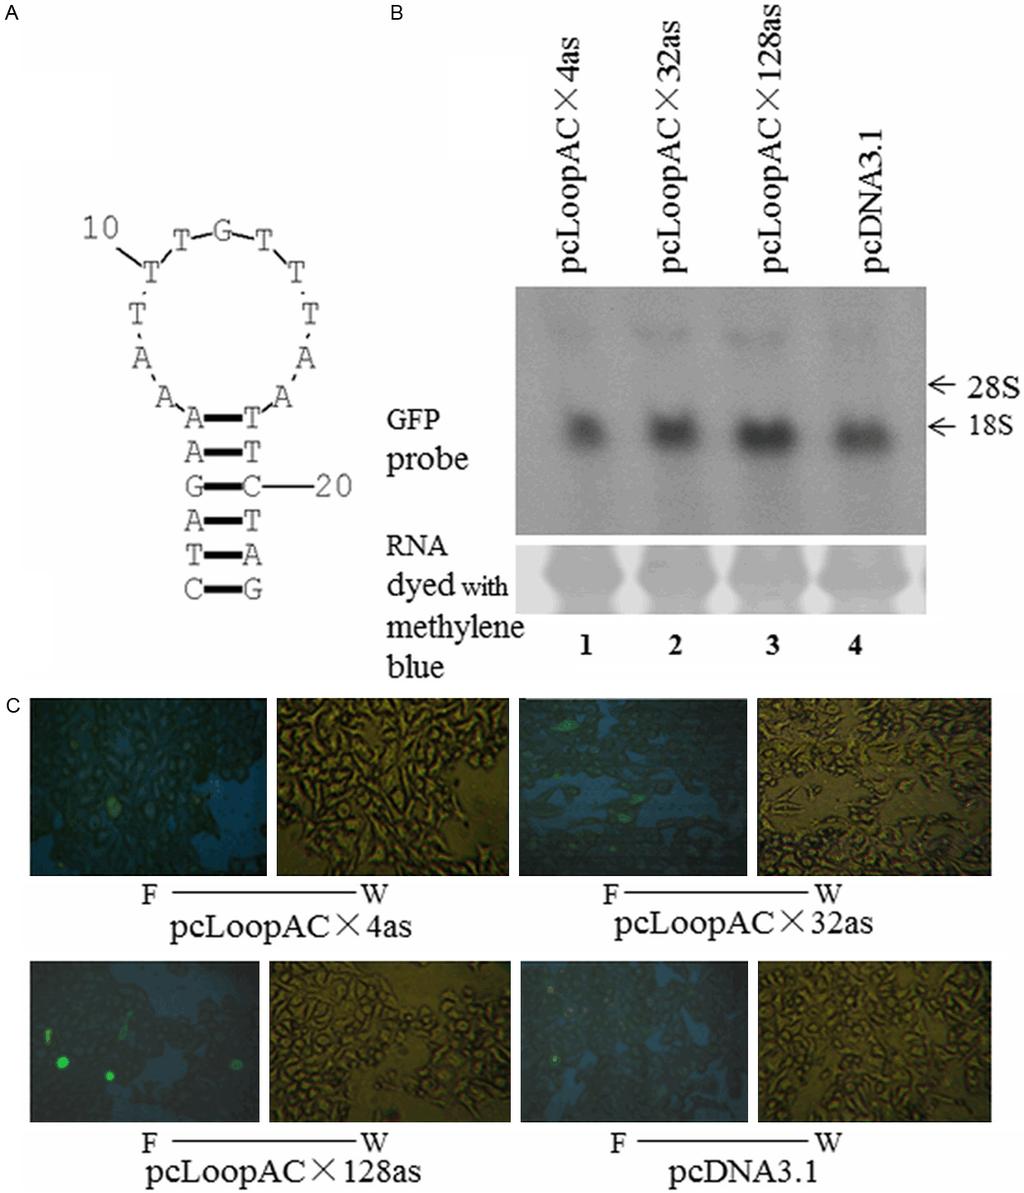 Figure 4. Northern blotting and fluorescence microscopy show that LoopAC (forming stem-loops) in modulator plasmids activate GFP expression in reporter plasmids in a length-dependent manner.